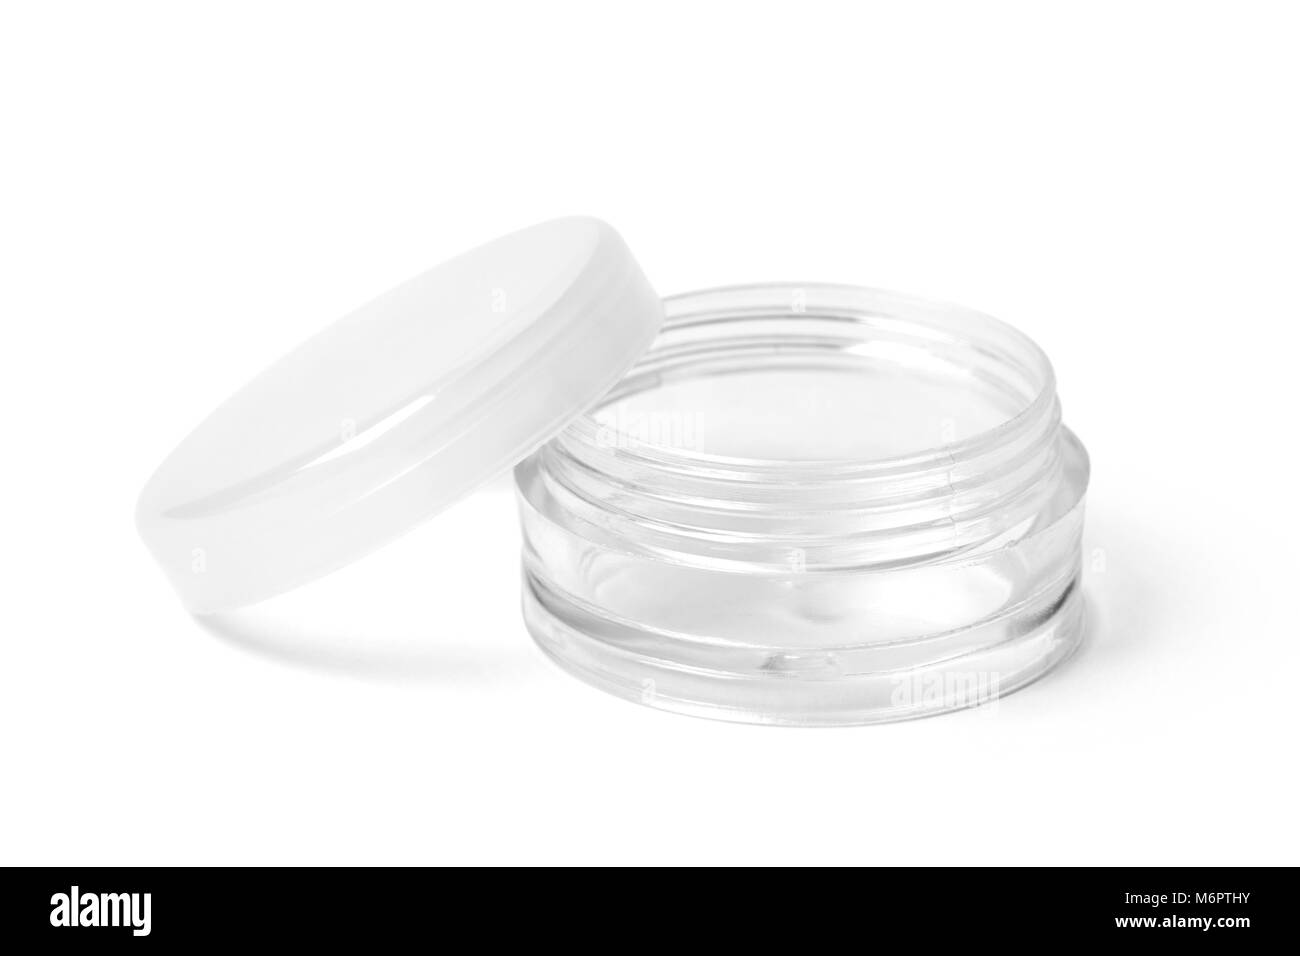 Open empty colorless transparent plastic container for cosmetic products. Image with working path. Stock Photo